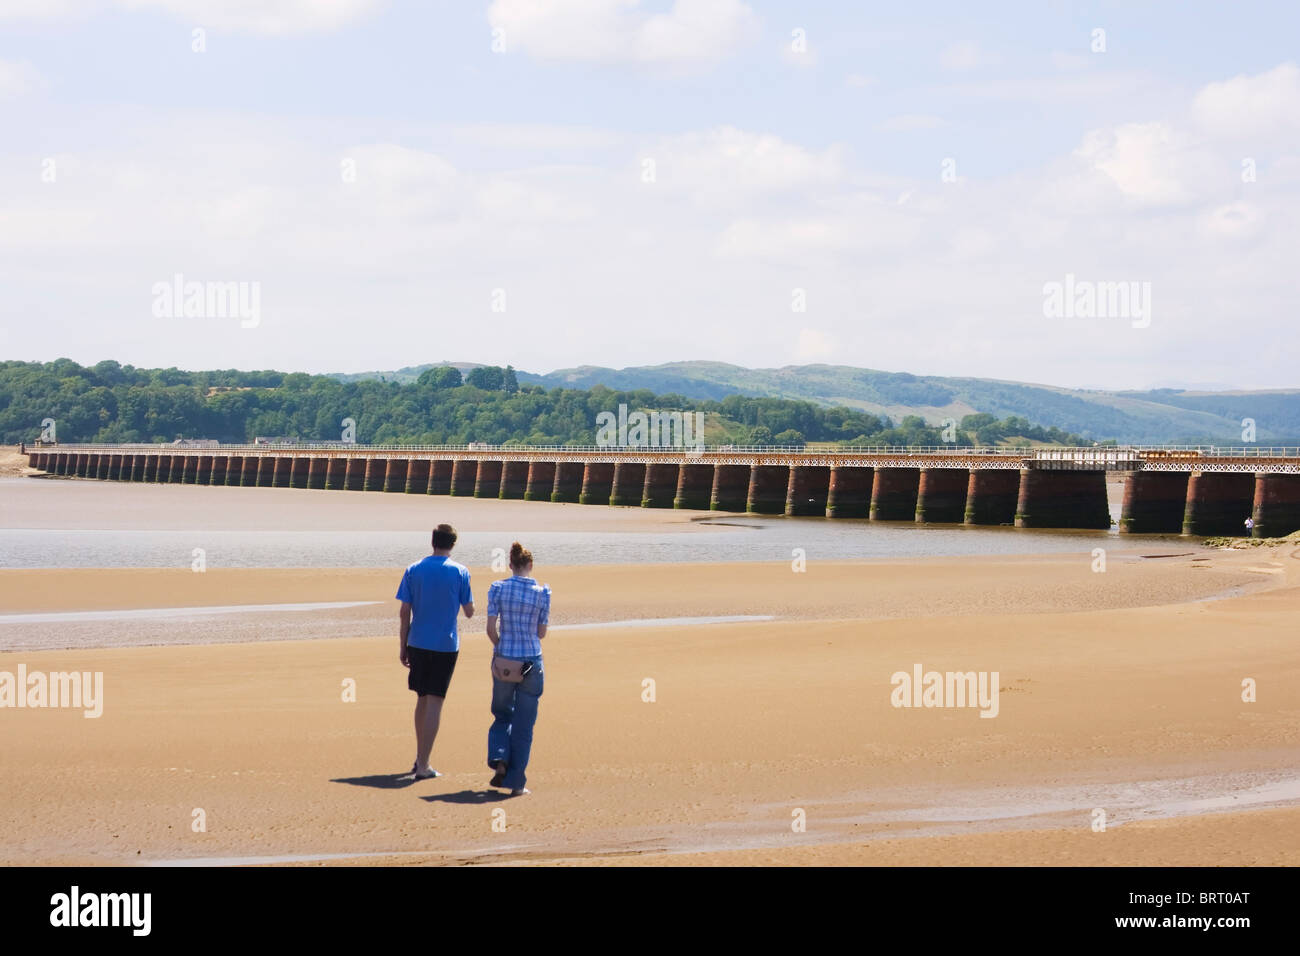 The Kent Viaduct at Arnside stretching across the River Kent estuary to Grange over Sands. Stock Photo